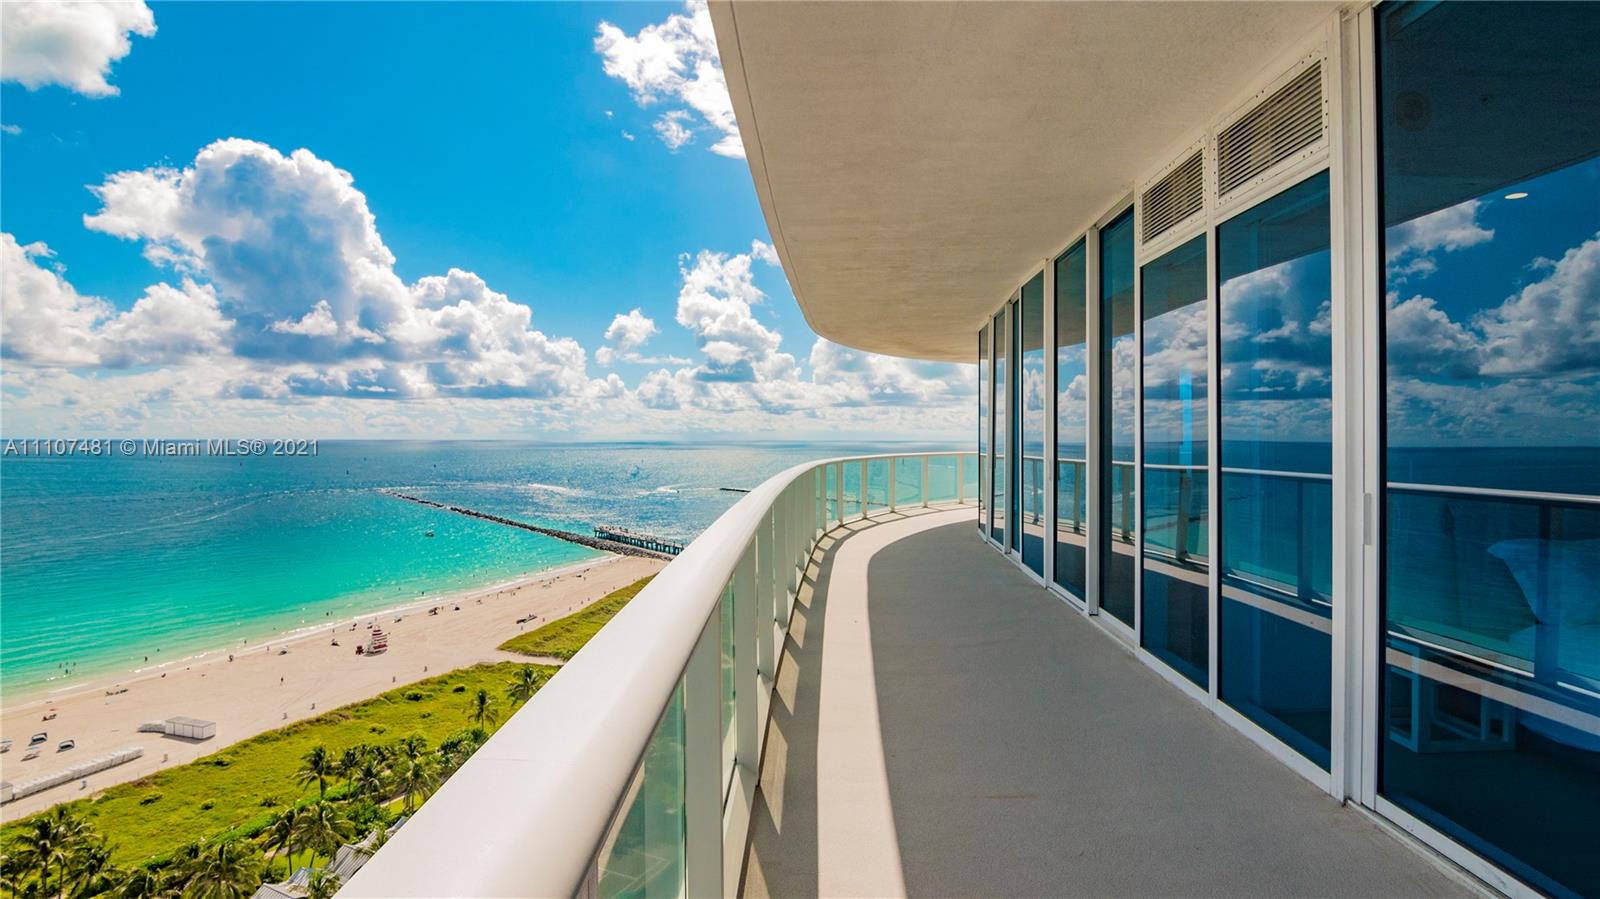 100 S Pointe Dr 1906/07, Miami Beach, Florida 33139, 5 Bedrooms Bedrooms, ,4 BathroomsBathrooms,Residential,For Sale,100 S Pointe Dr 1906/07,A11107481